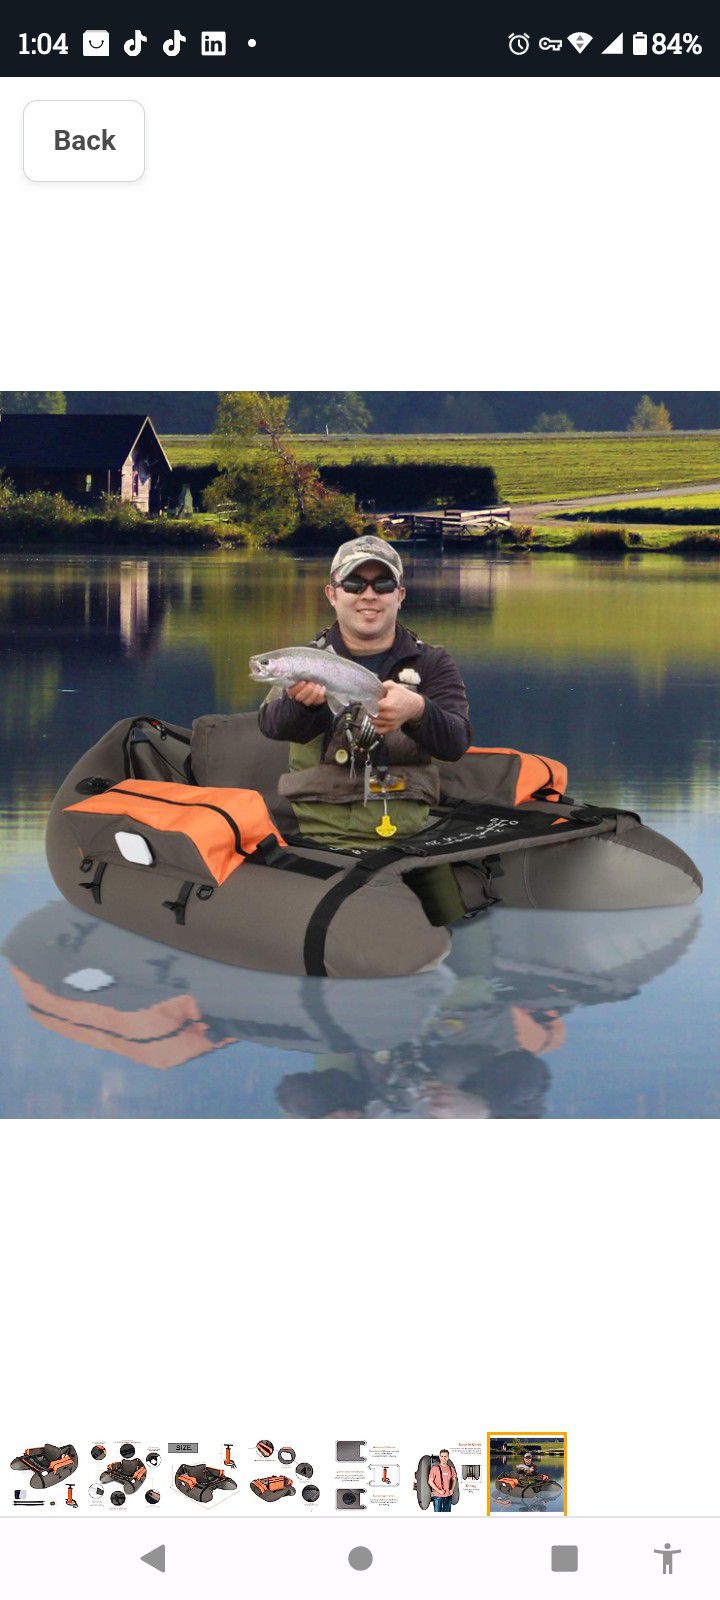 Lazzo Inflatable Fishing Float Tube. Brand New! Make Offer for